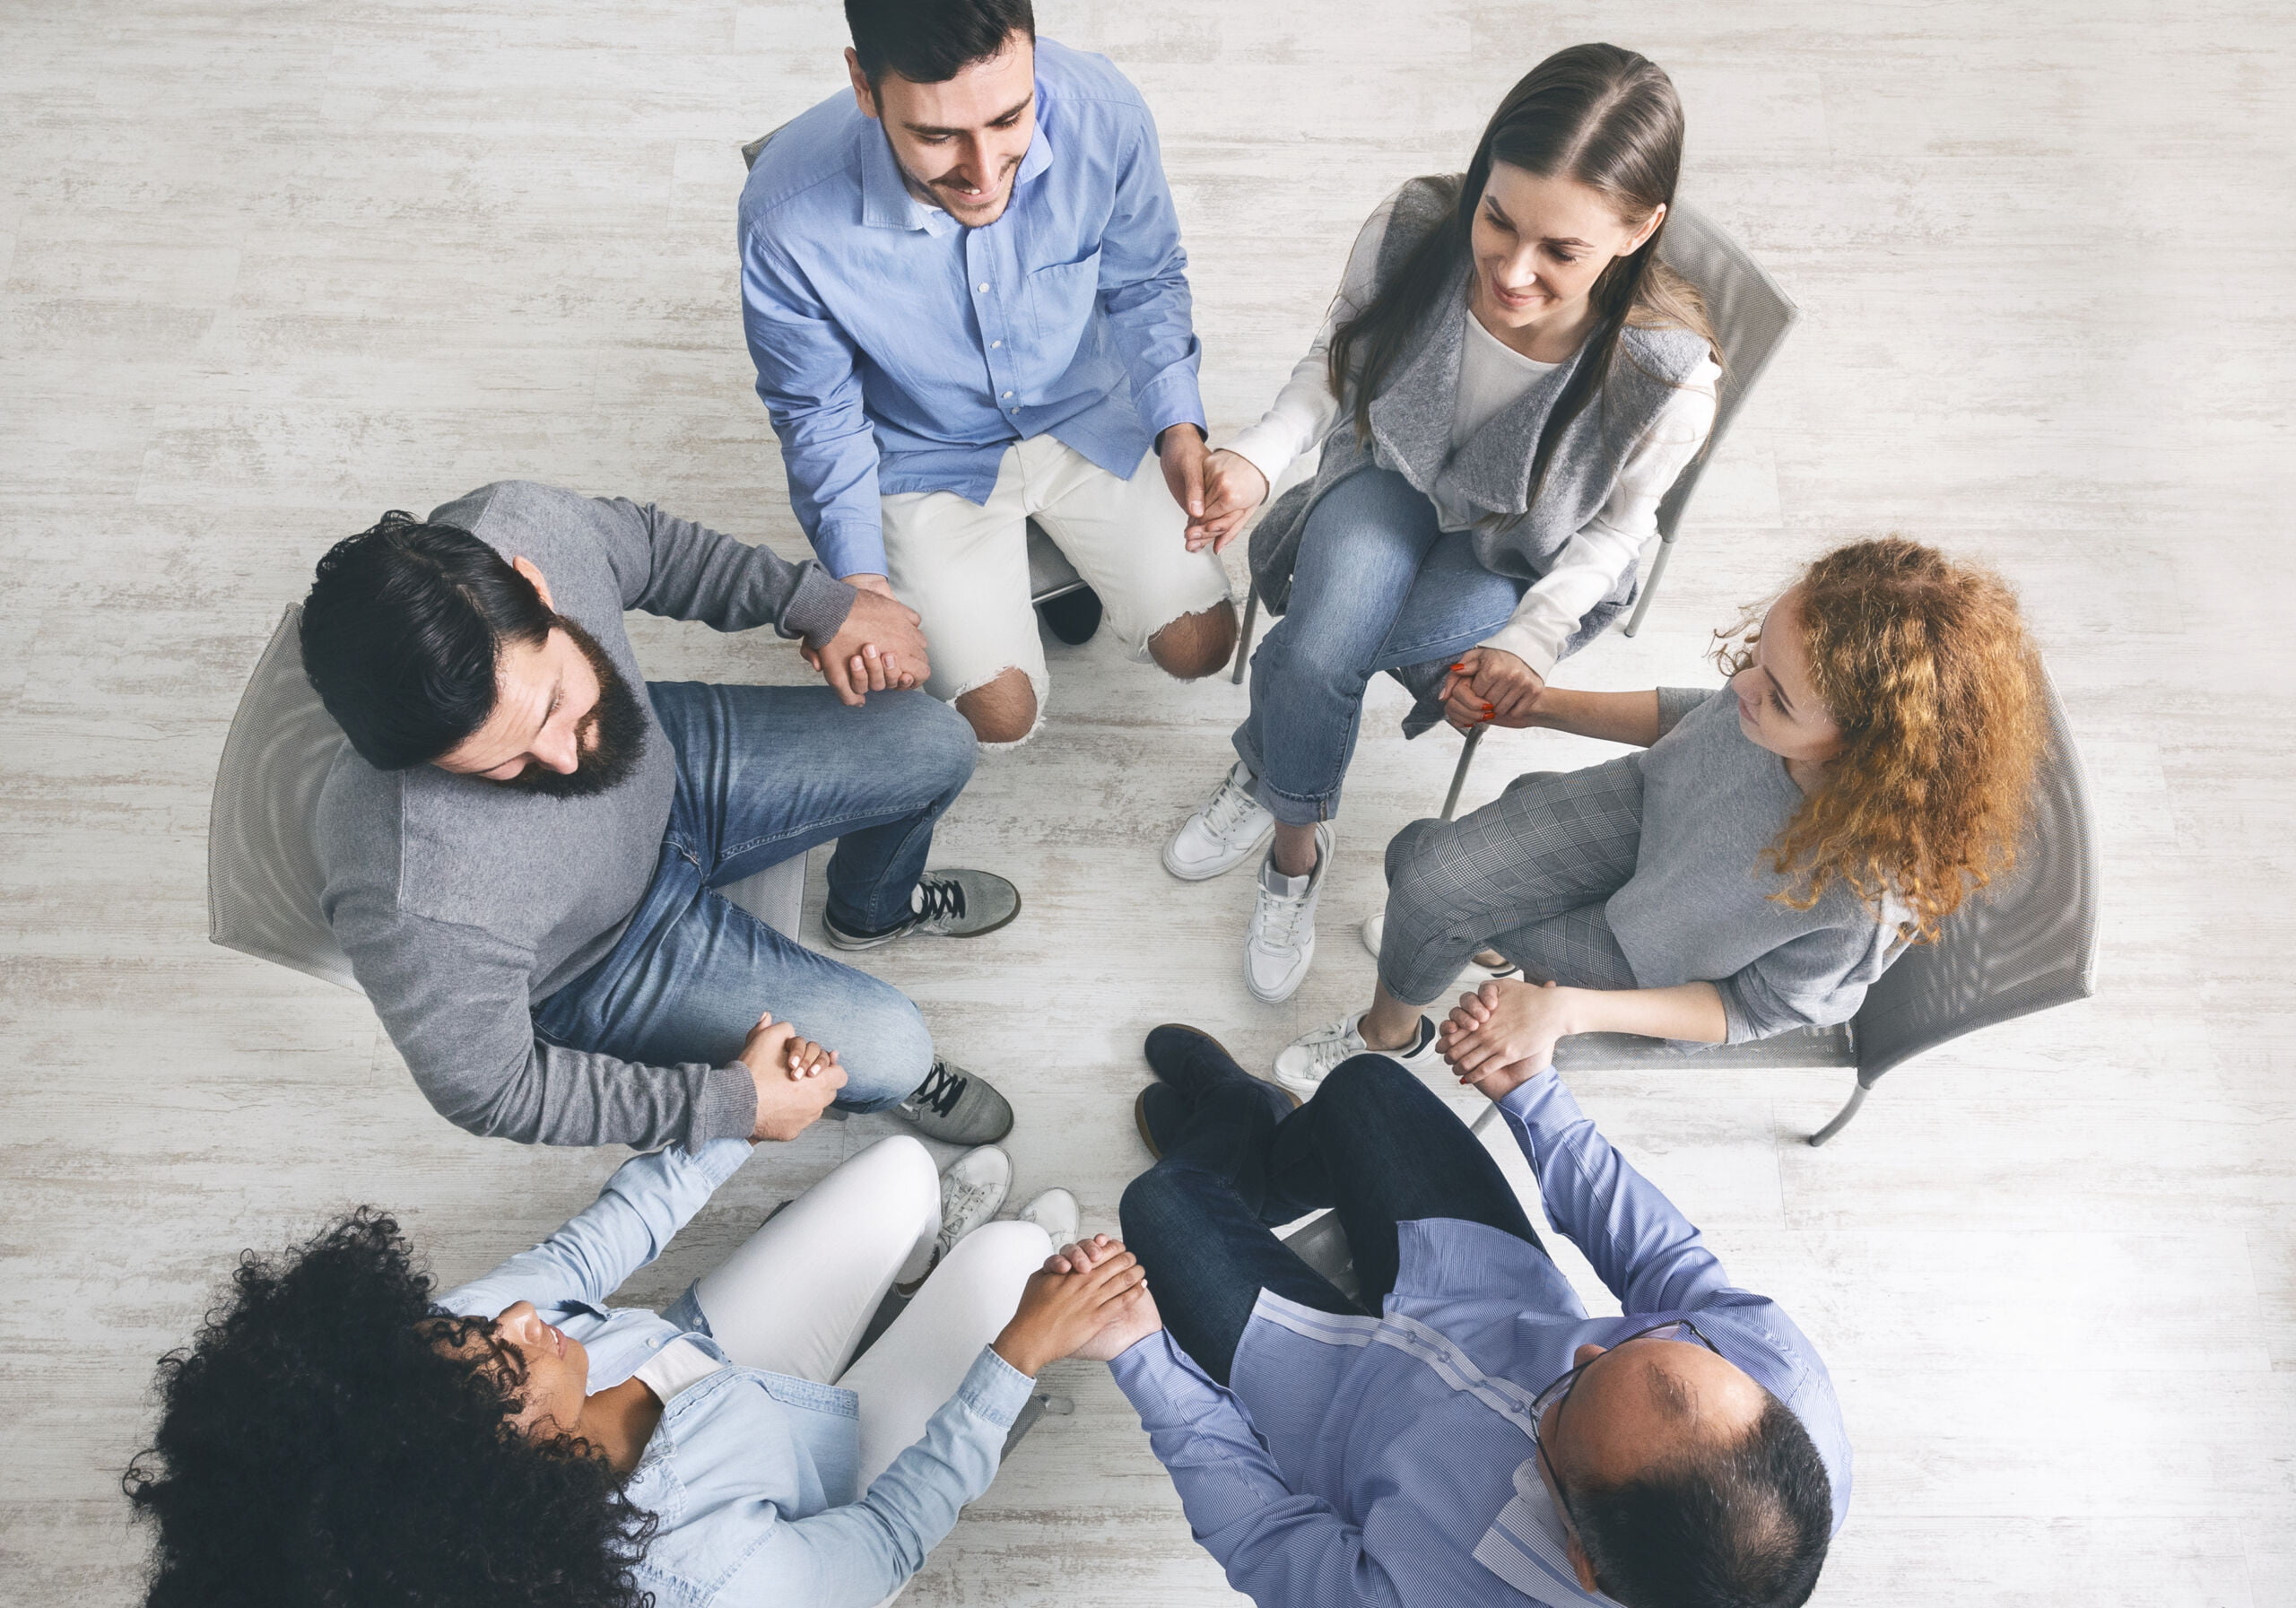 Diverse group of individuals participating in a therapy session, sitting in a circle and holding hands, symbolizing support and understanding.